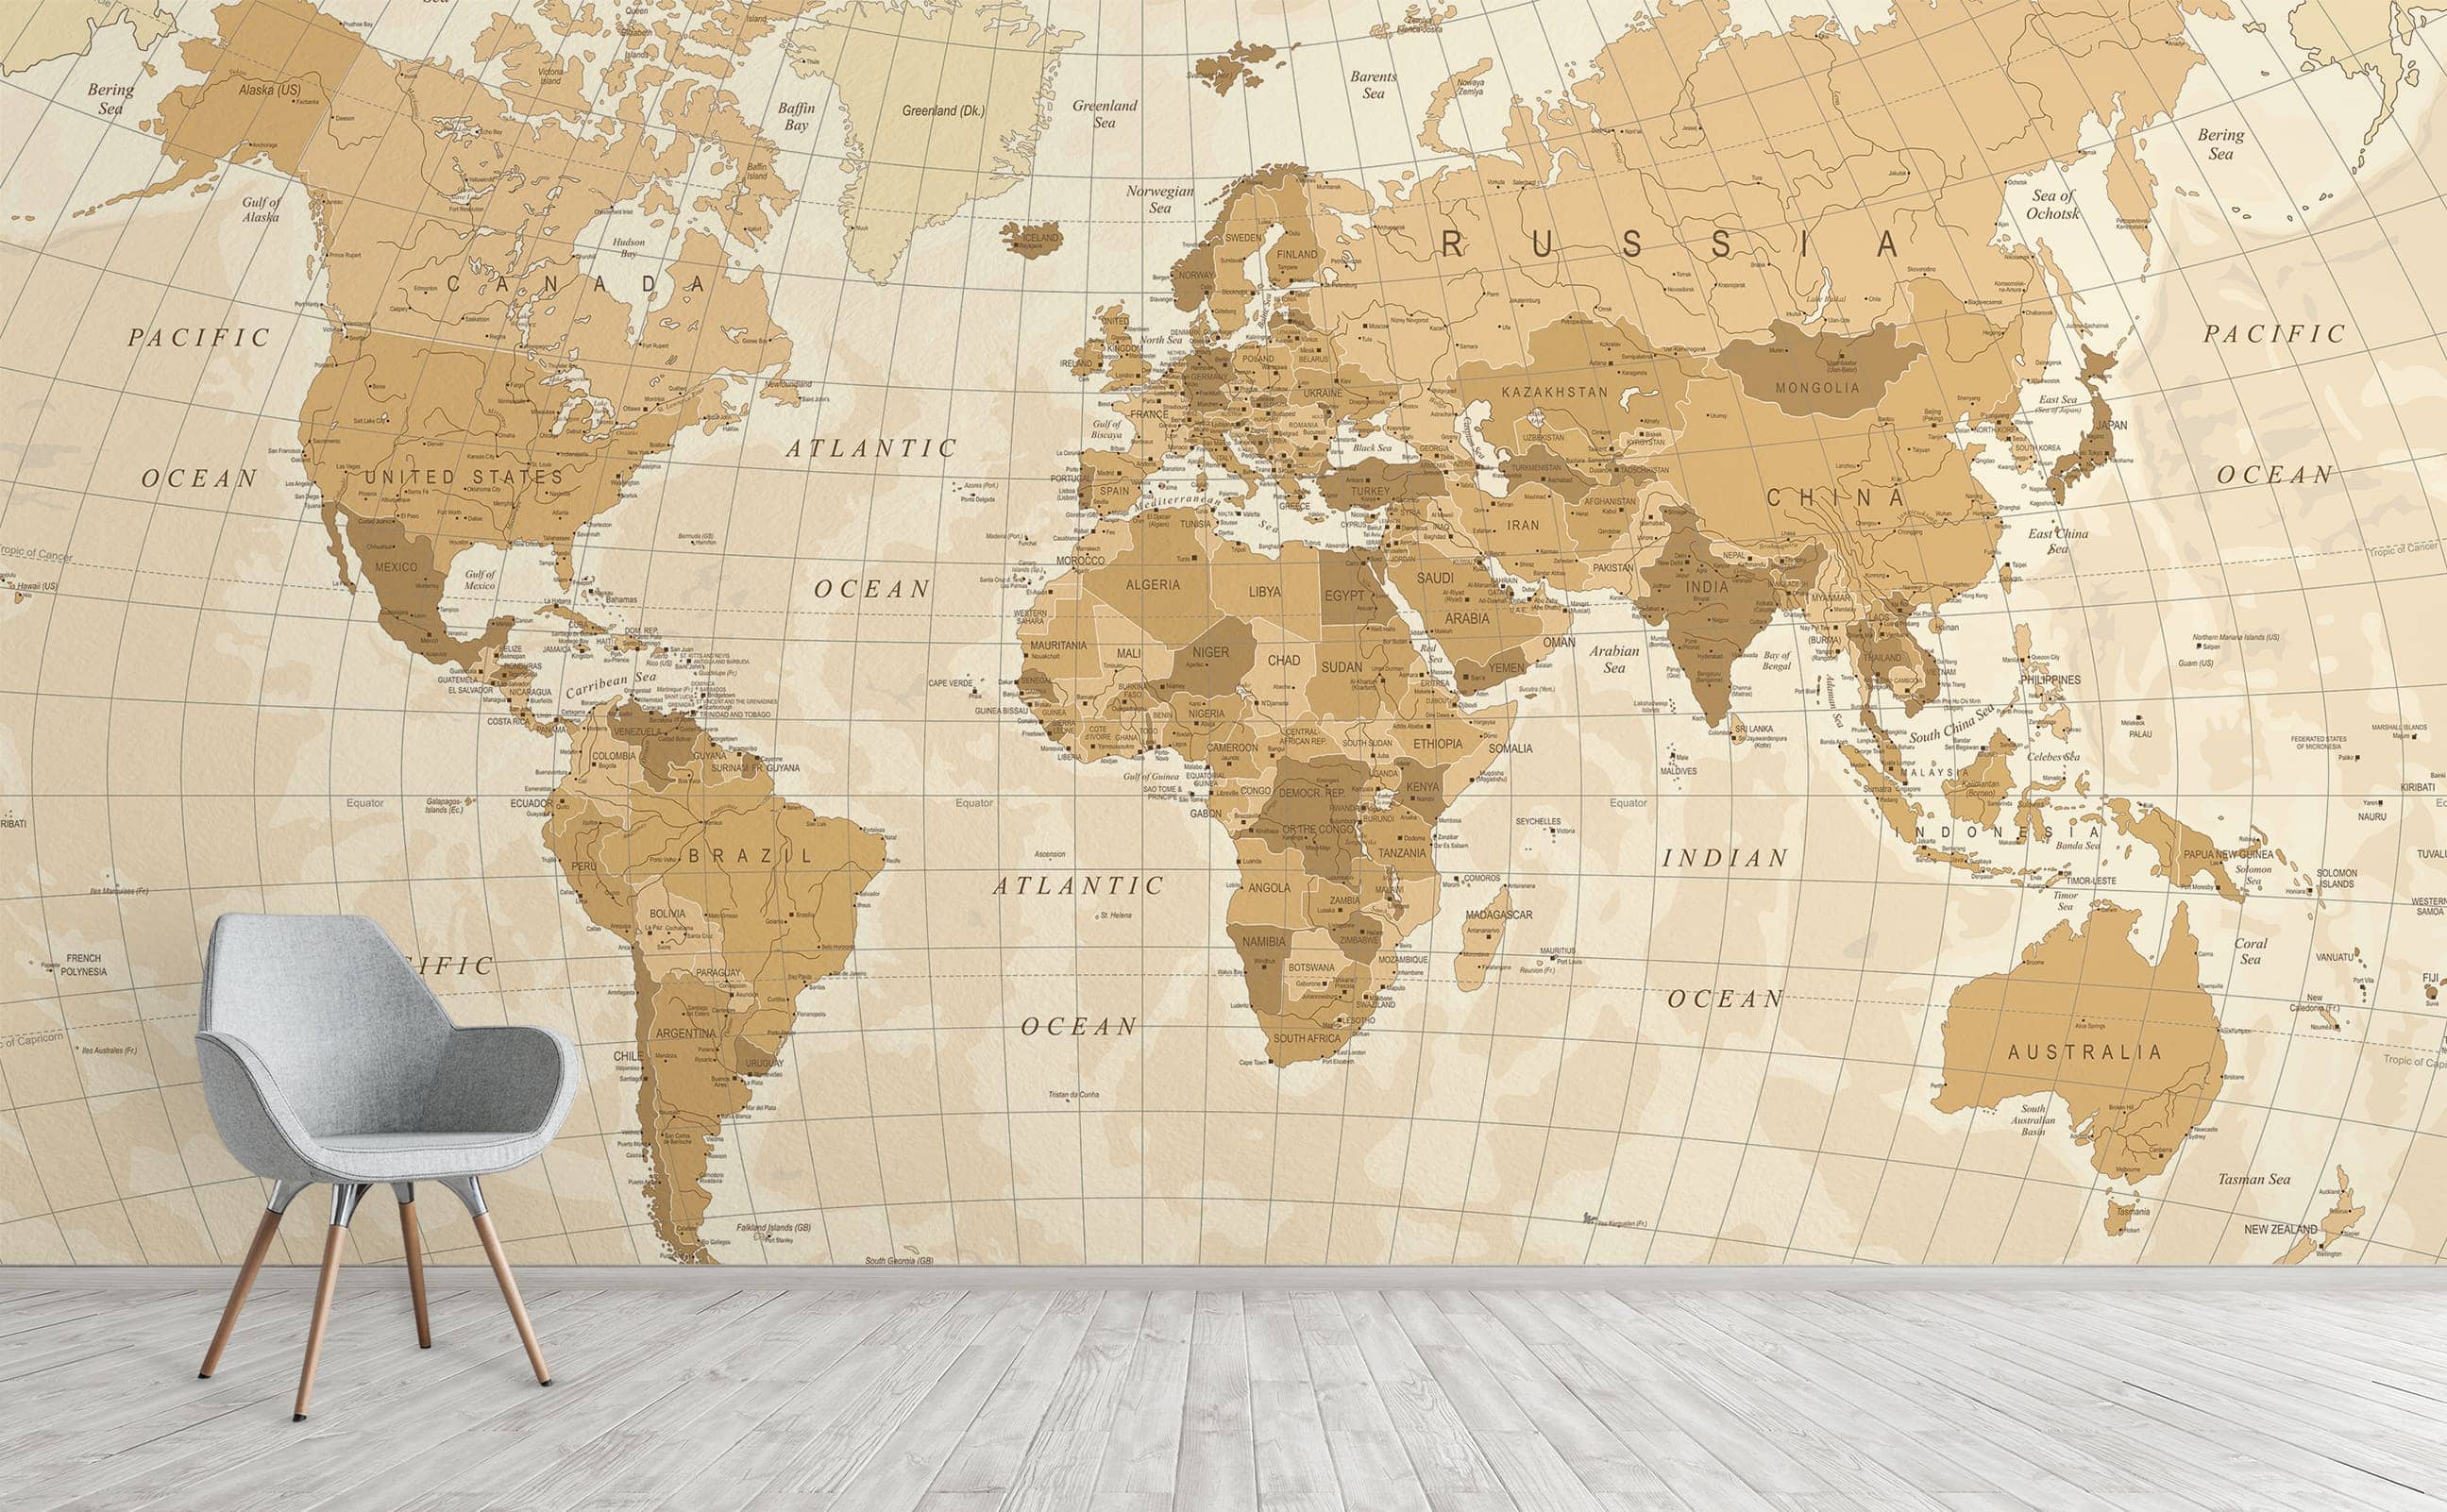 M2081 1s Stereographic Projection Modern Sepia World Map Wall Mural Across The Globe For Interior Walls 12 ?v=1596497314